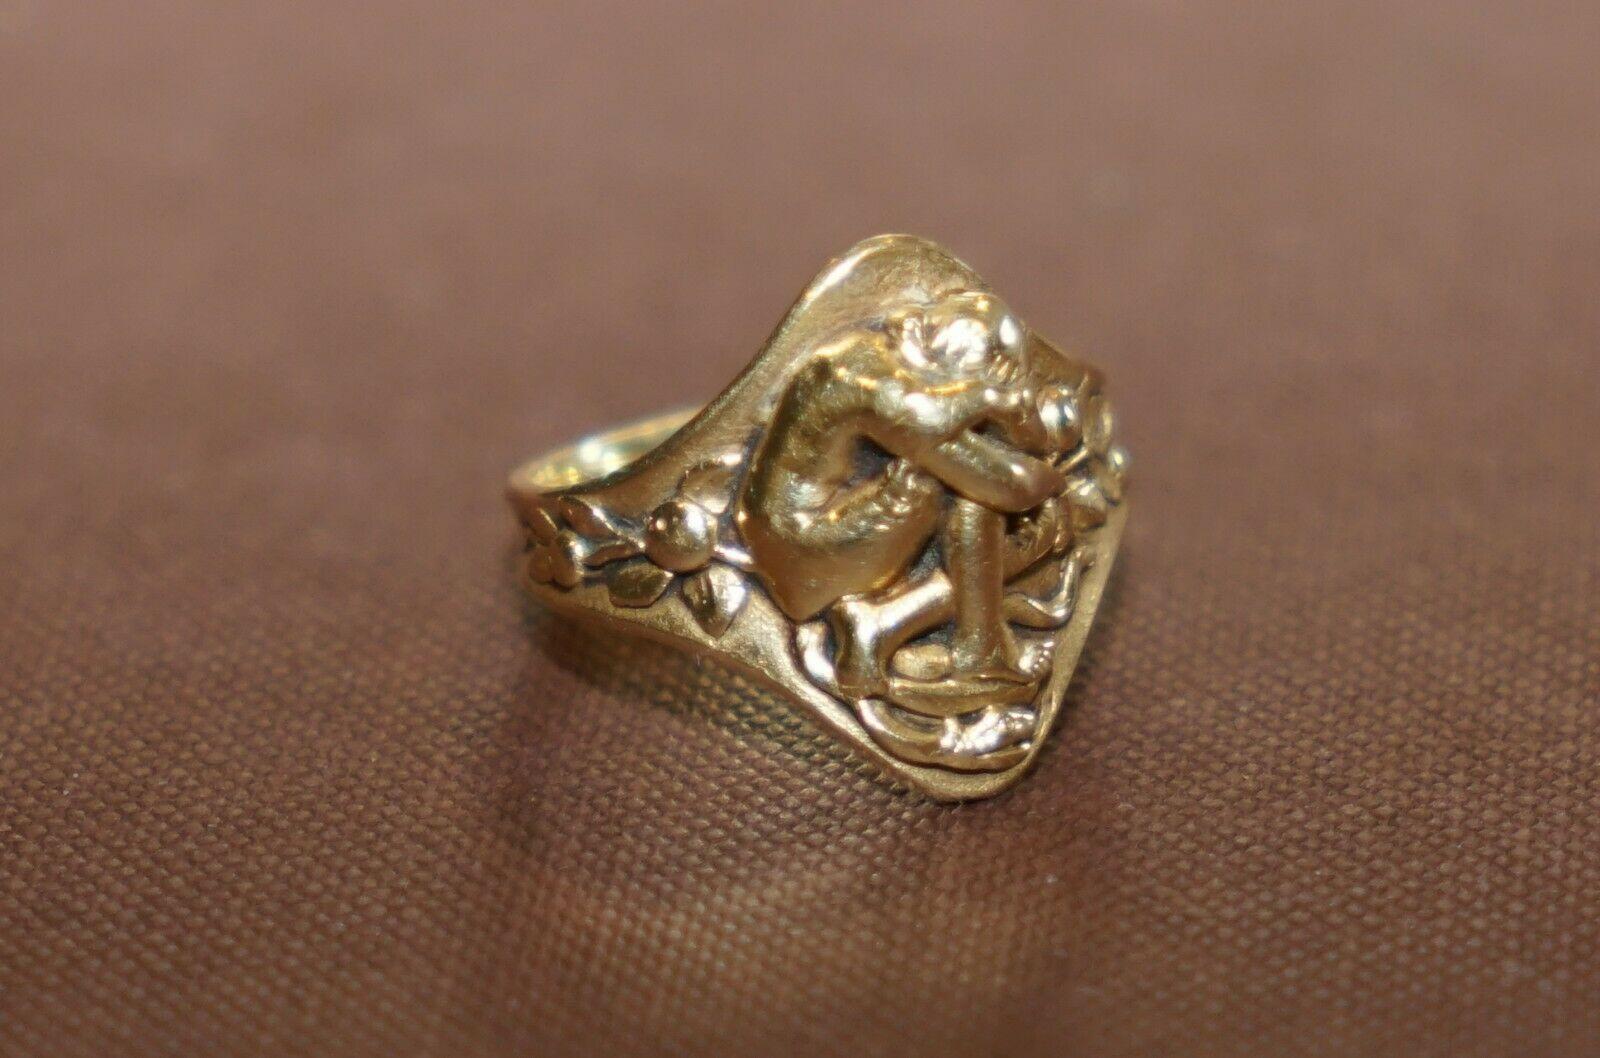 Wimbledon - Furniture are delighted to offer for sale this incredibly rare original Art Nouveau French solid gold ring on Eve in a crouched position with the serpent at her feet and the forbidden fruit either side attributed to the great Paul